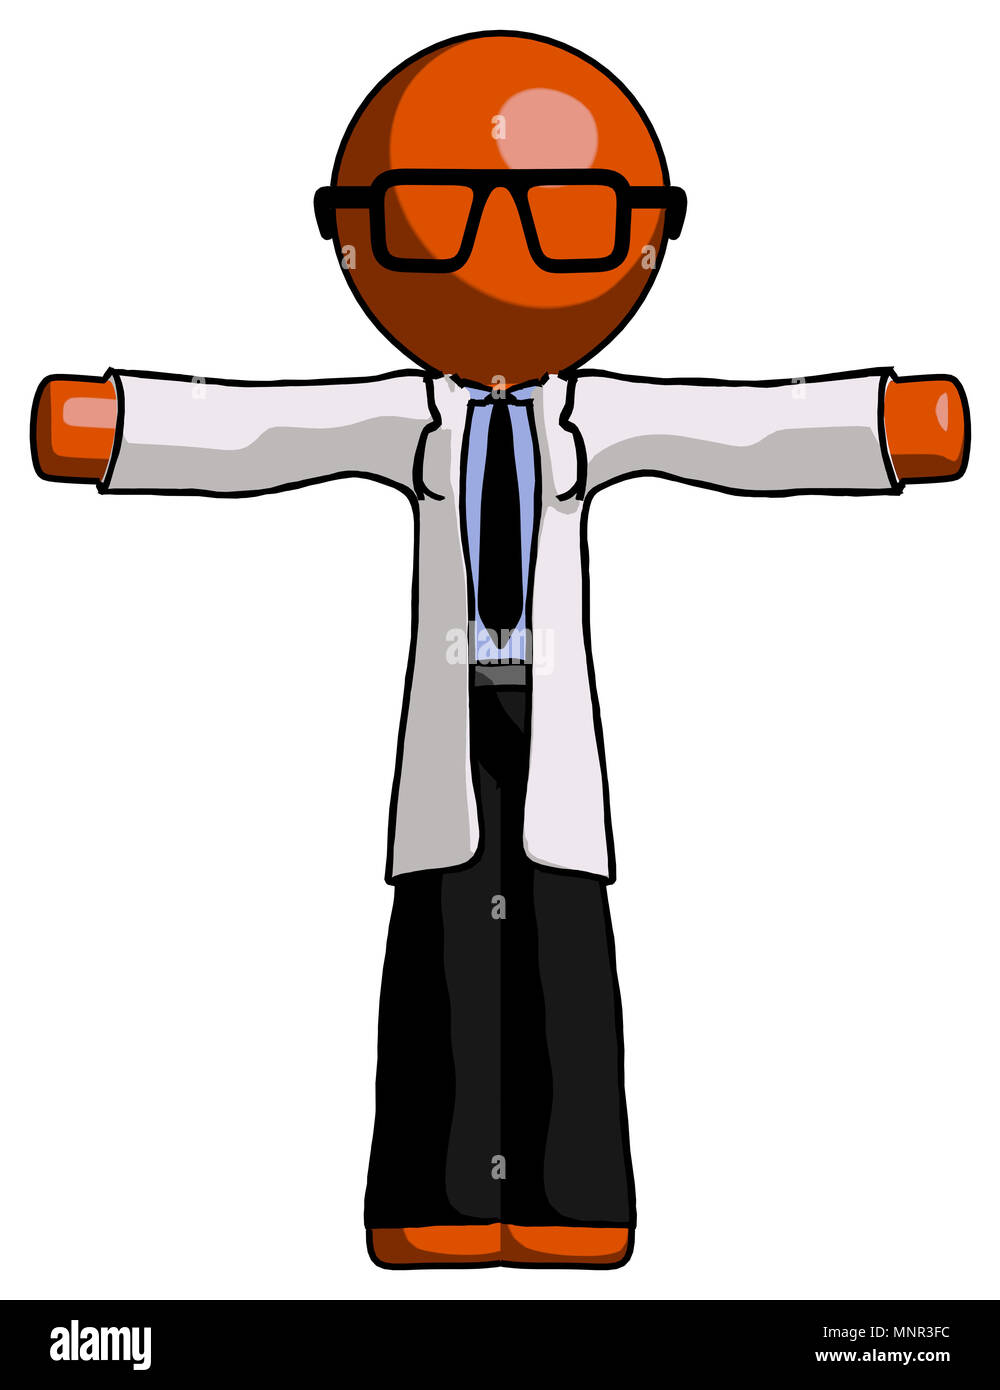 Cartoon Mobile Phone Character T Pose Stock Illustrations – 27 Cartoon  Mobile Phone Character T Pose Stock Illustrations, Vectors & Clipart -  Dreamstime